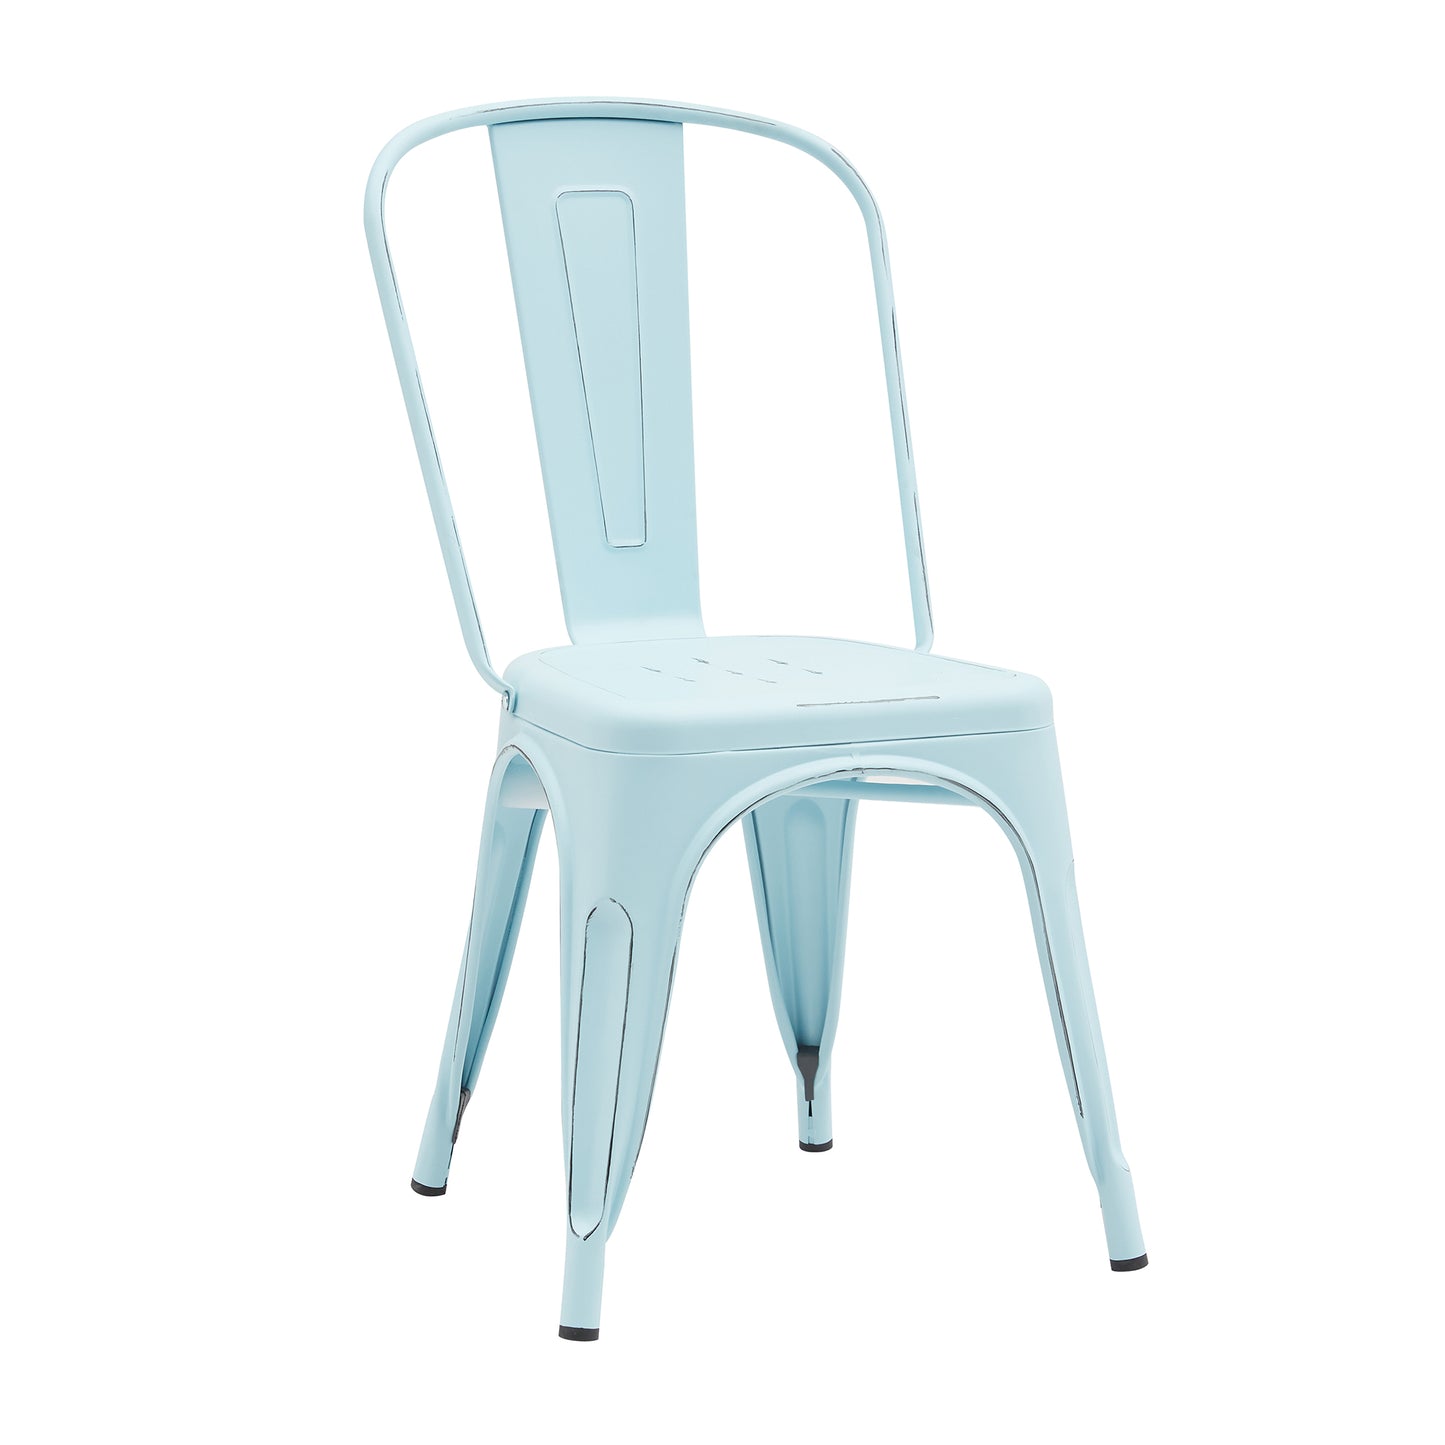 Industrial Dining Chair With Powder Coated Color